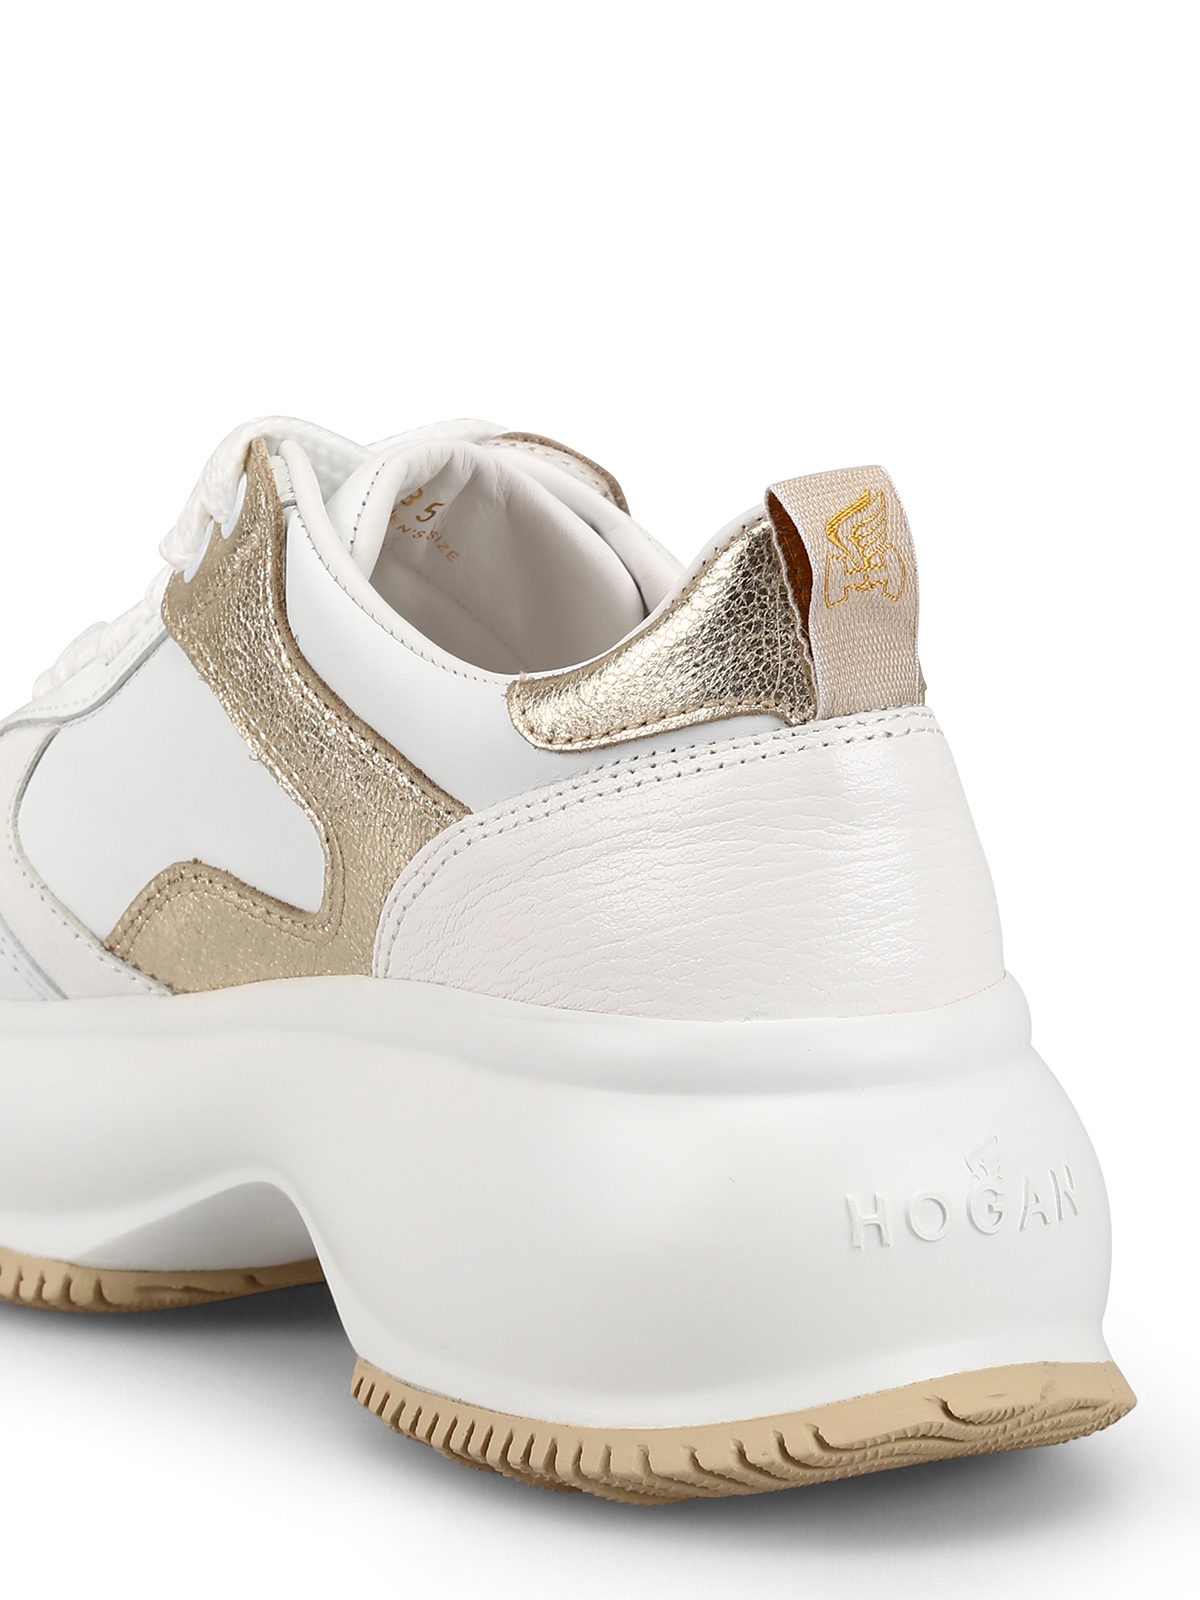 Clip vlinder Reusachtig verlamming Trainers Hogan - Maxi I Active white and gold sneakers - HXW4350BN50KOX0ST1